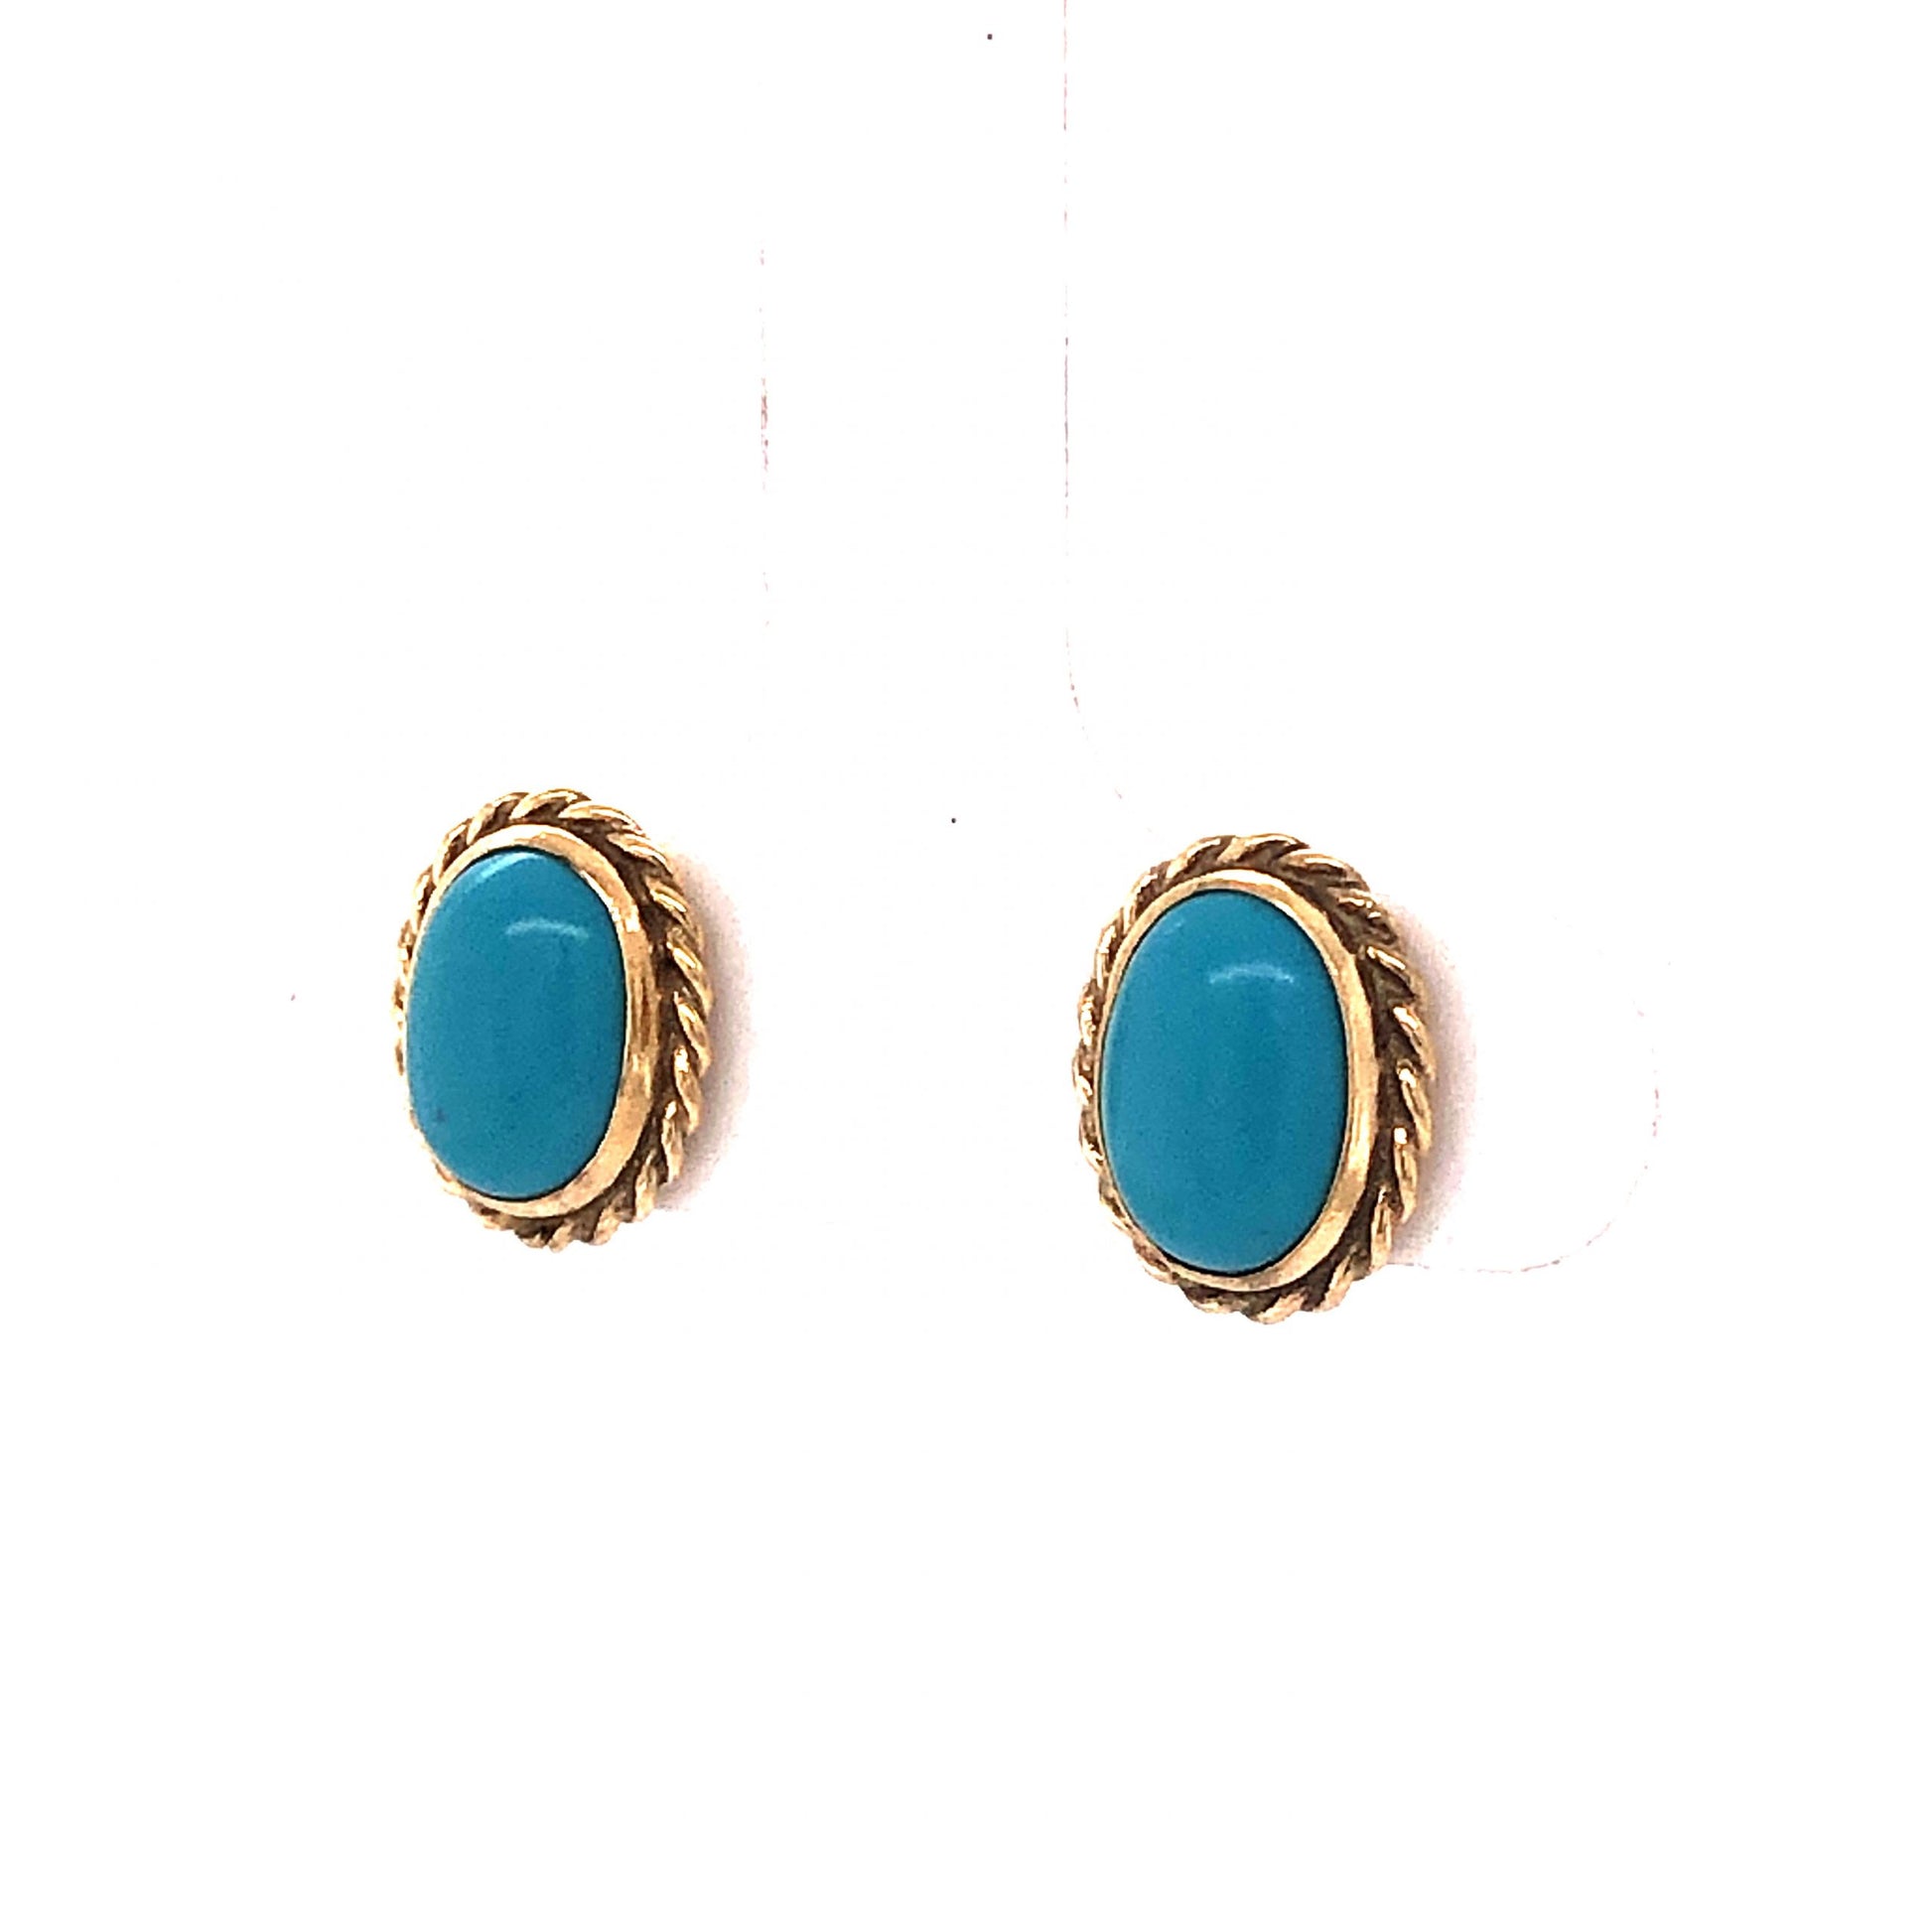 Everyday Turquoise Stud Earrings in 14k Yellow Gold